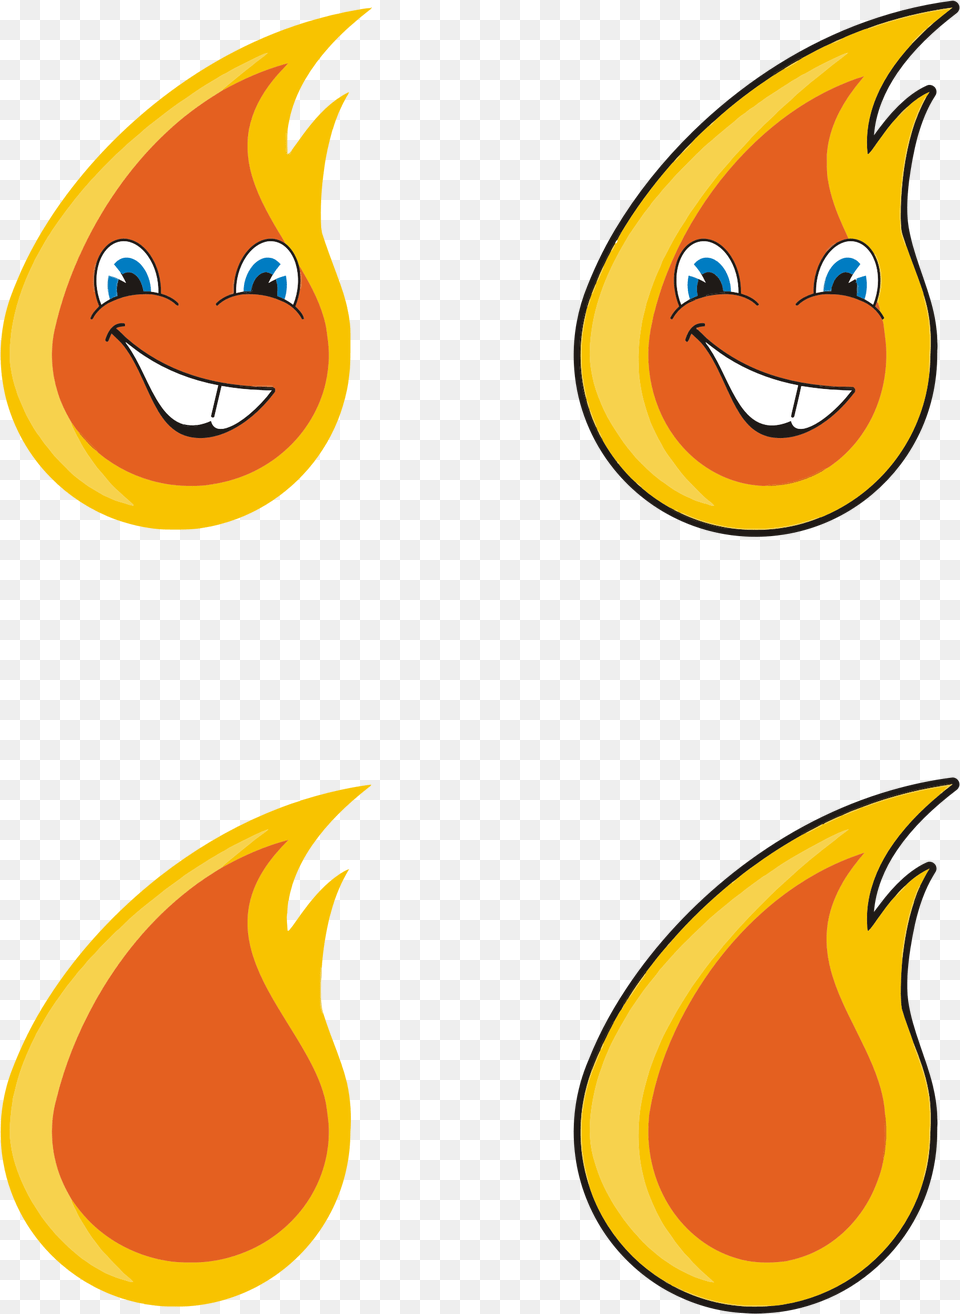 Anthropomorphic Flame Clip Arts Cartoon Flame Png